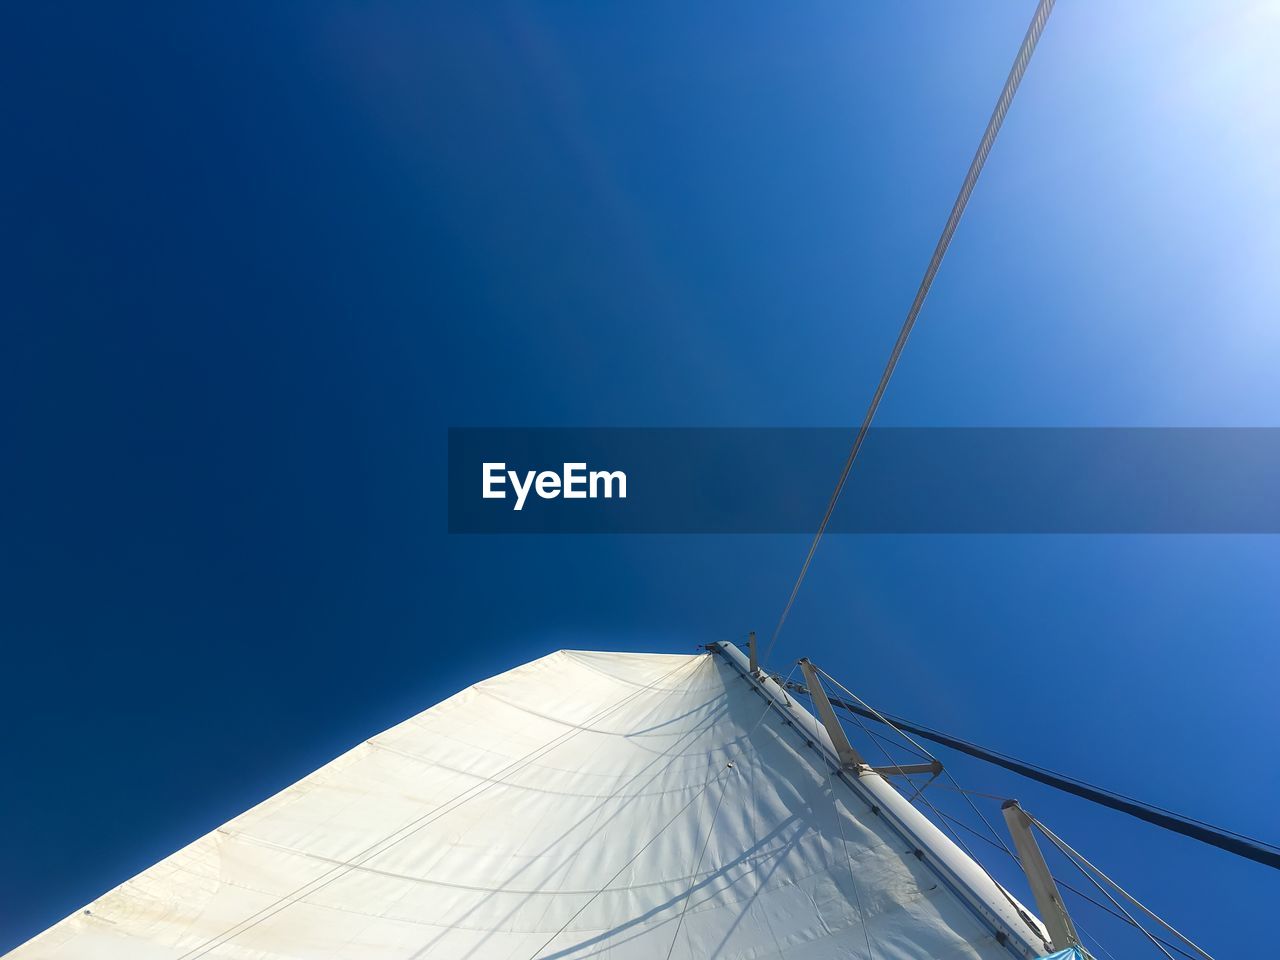 Mast and canvas of sailboat against sky